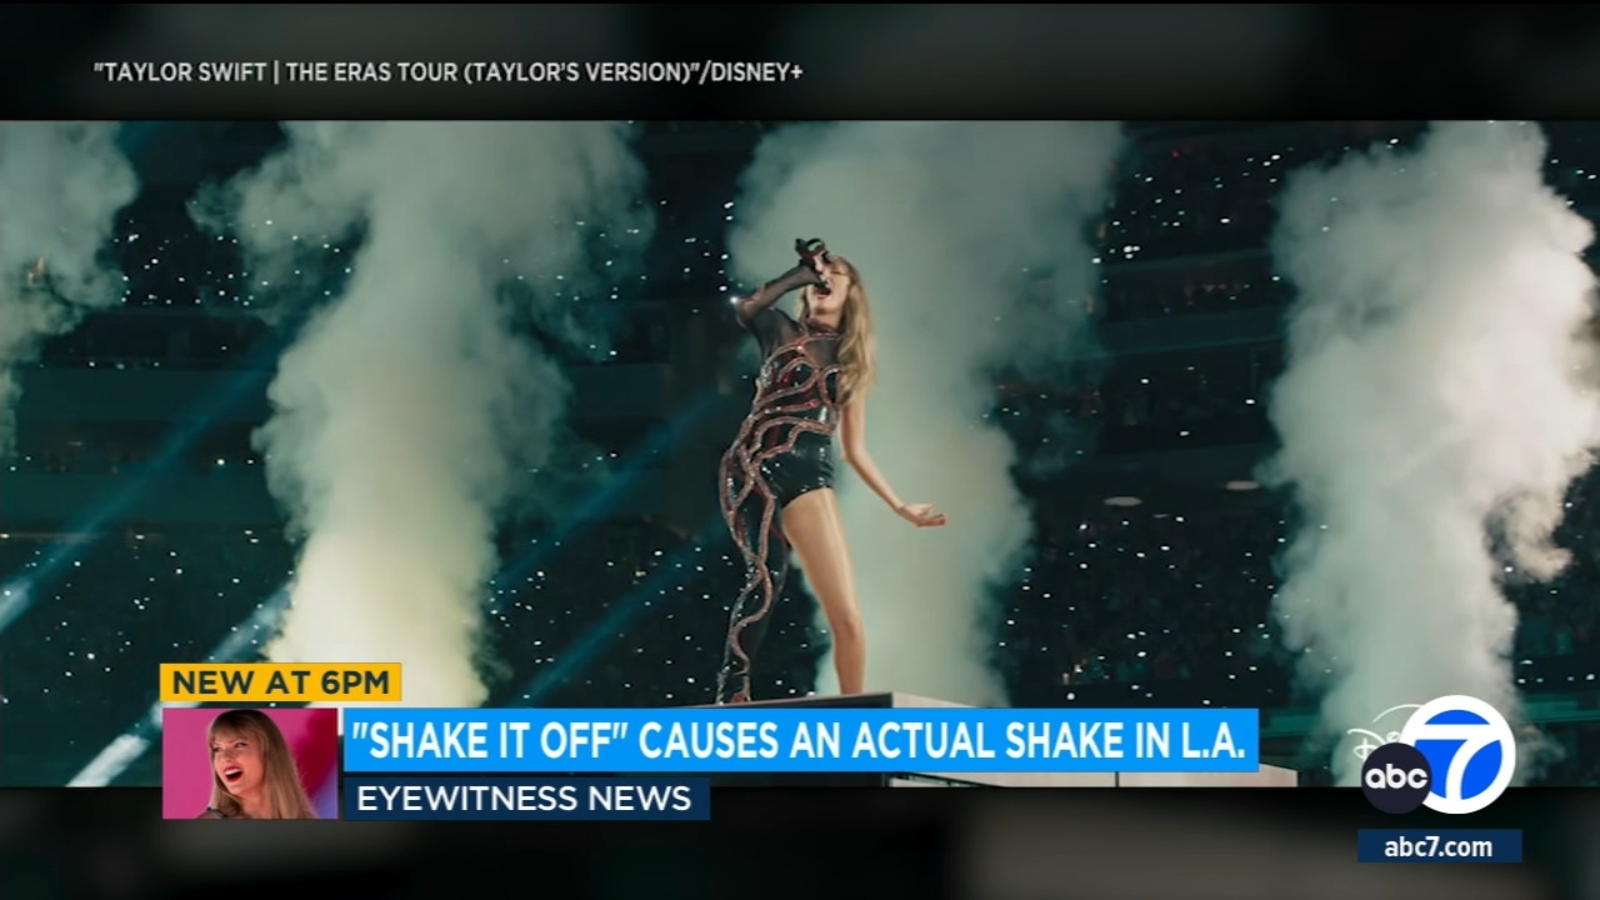 Taylor Swift show at SoFi Stadium in Los Angeles made ground shake like an earthquake, Caltech study says [Video]